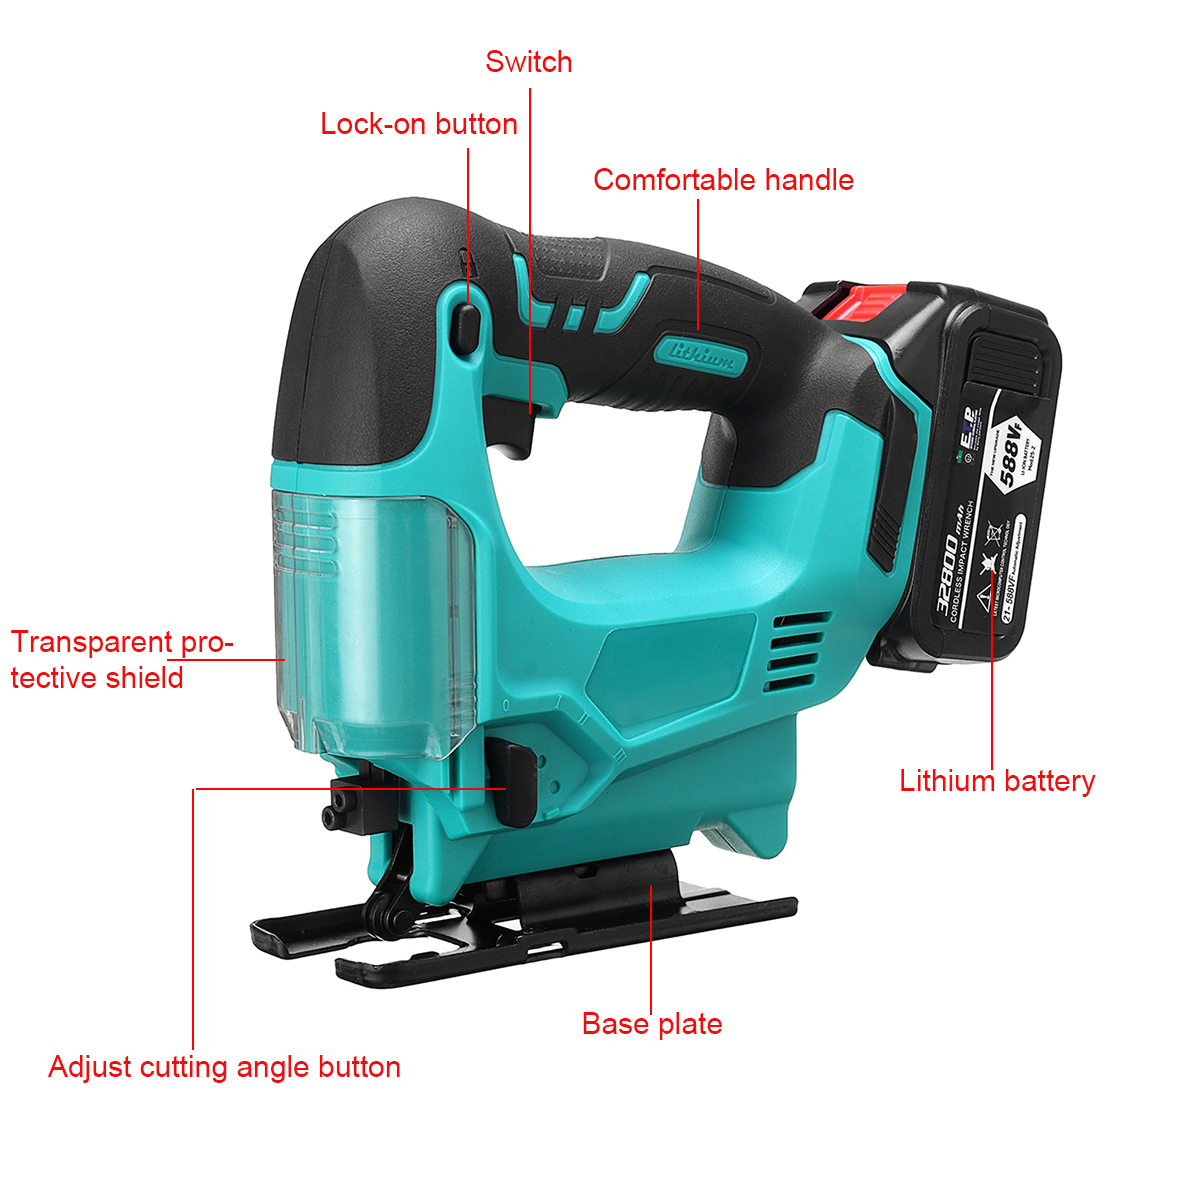 588VF-Electric-Jigsaw-Cordless-Portable-Woodworking-Cutting-Jig-Saw-Power-Tools-W-None12-Battery-1883229-10